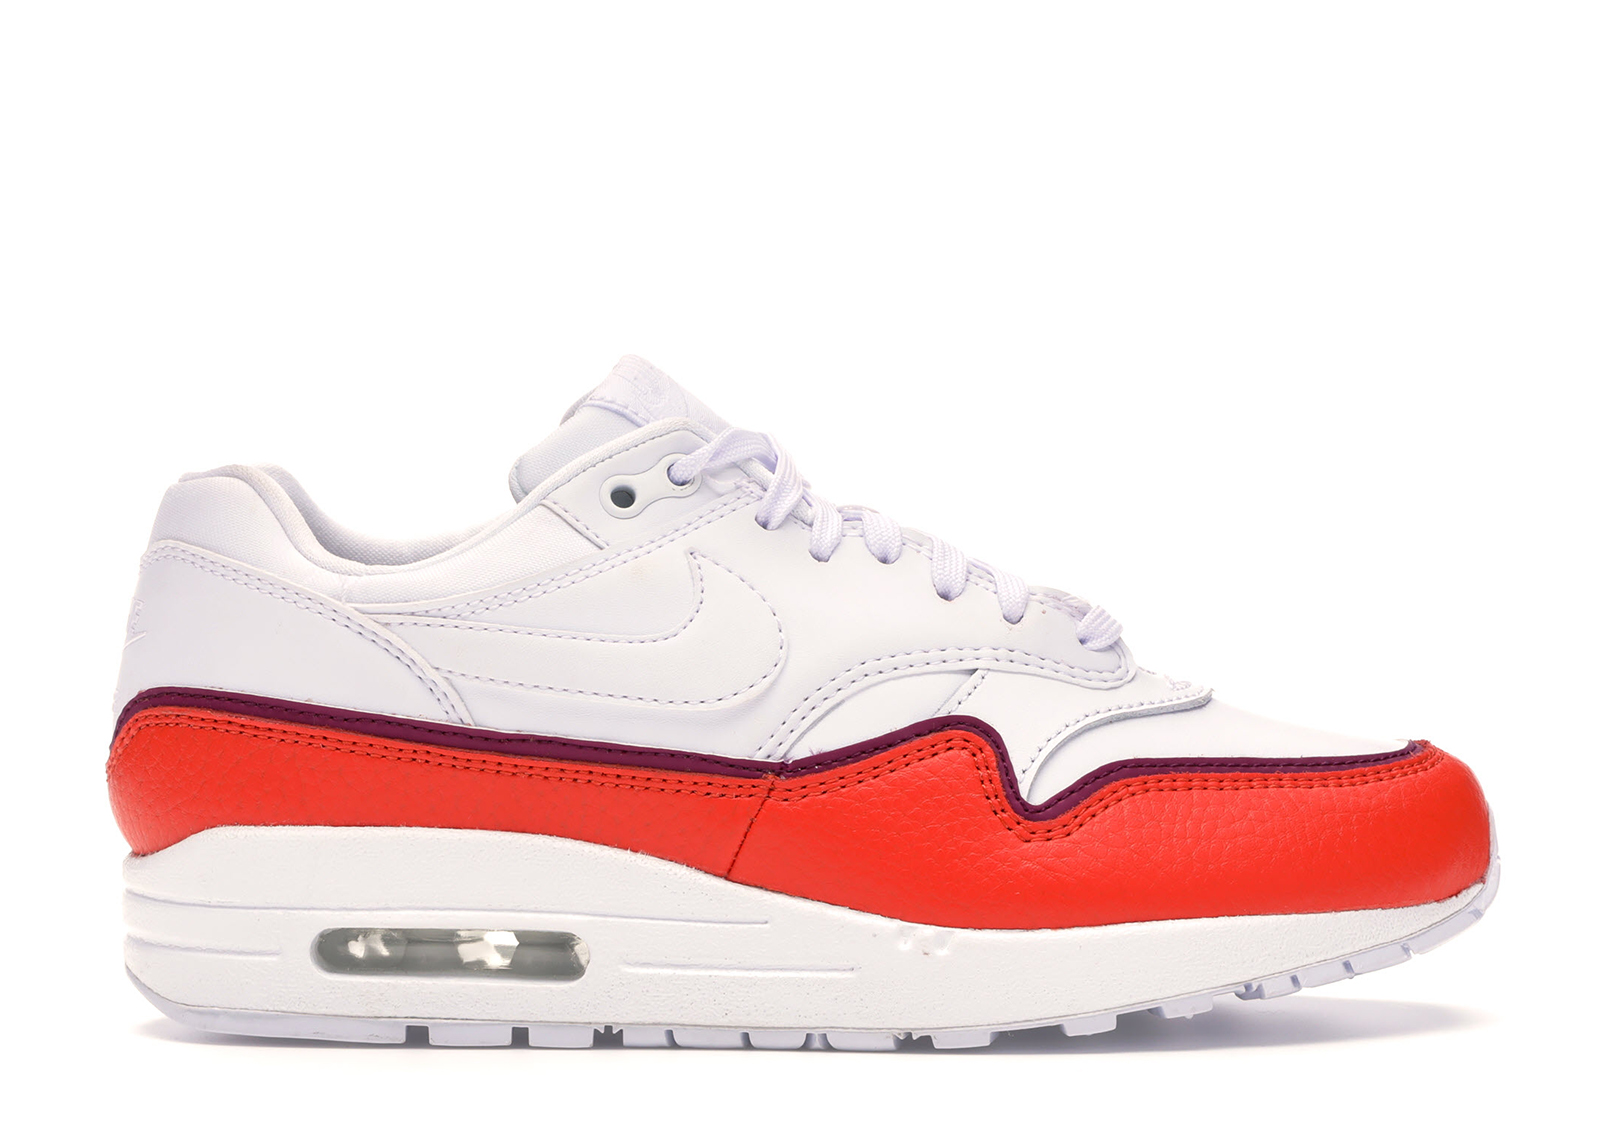 Nike Air Max 1 Liner White Red (Women's) - 881101-102 - JP